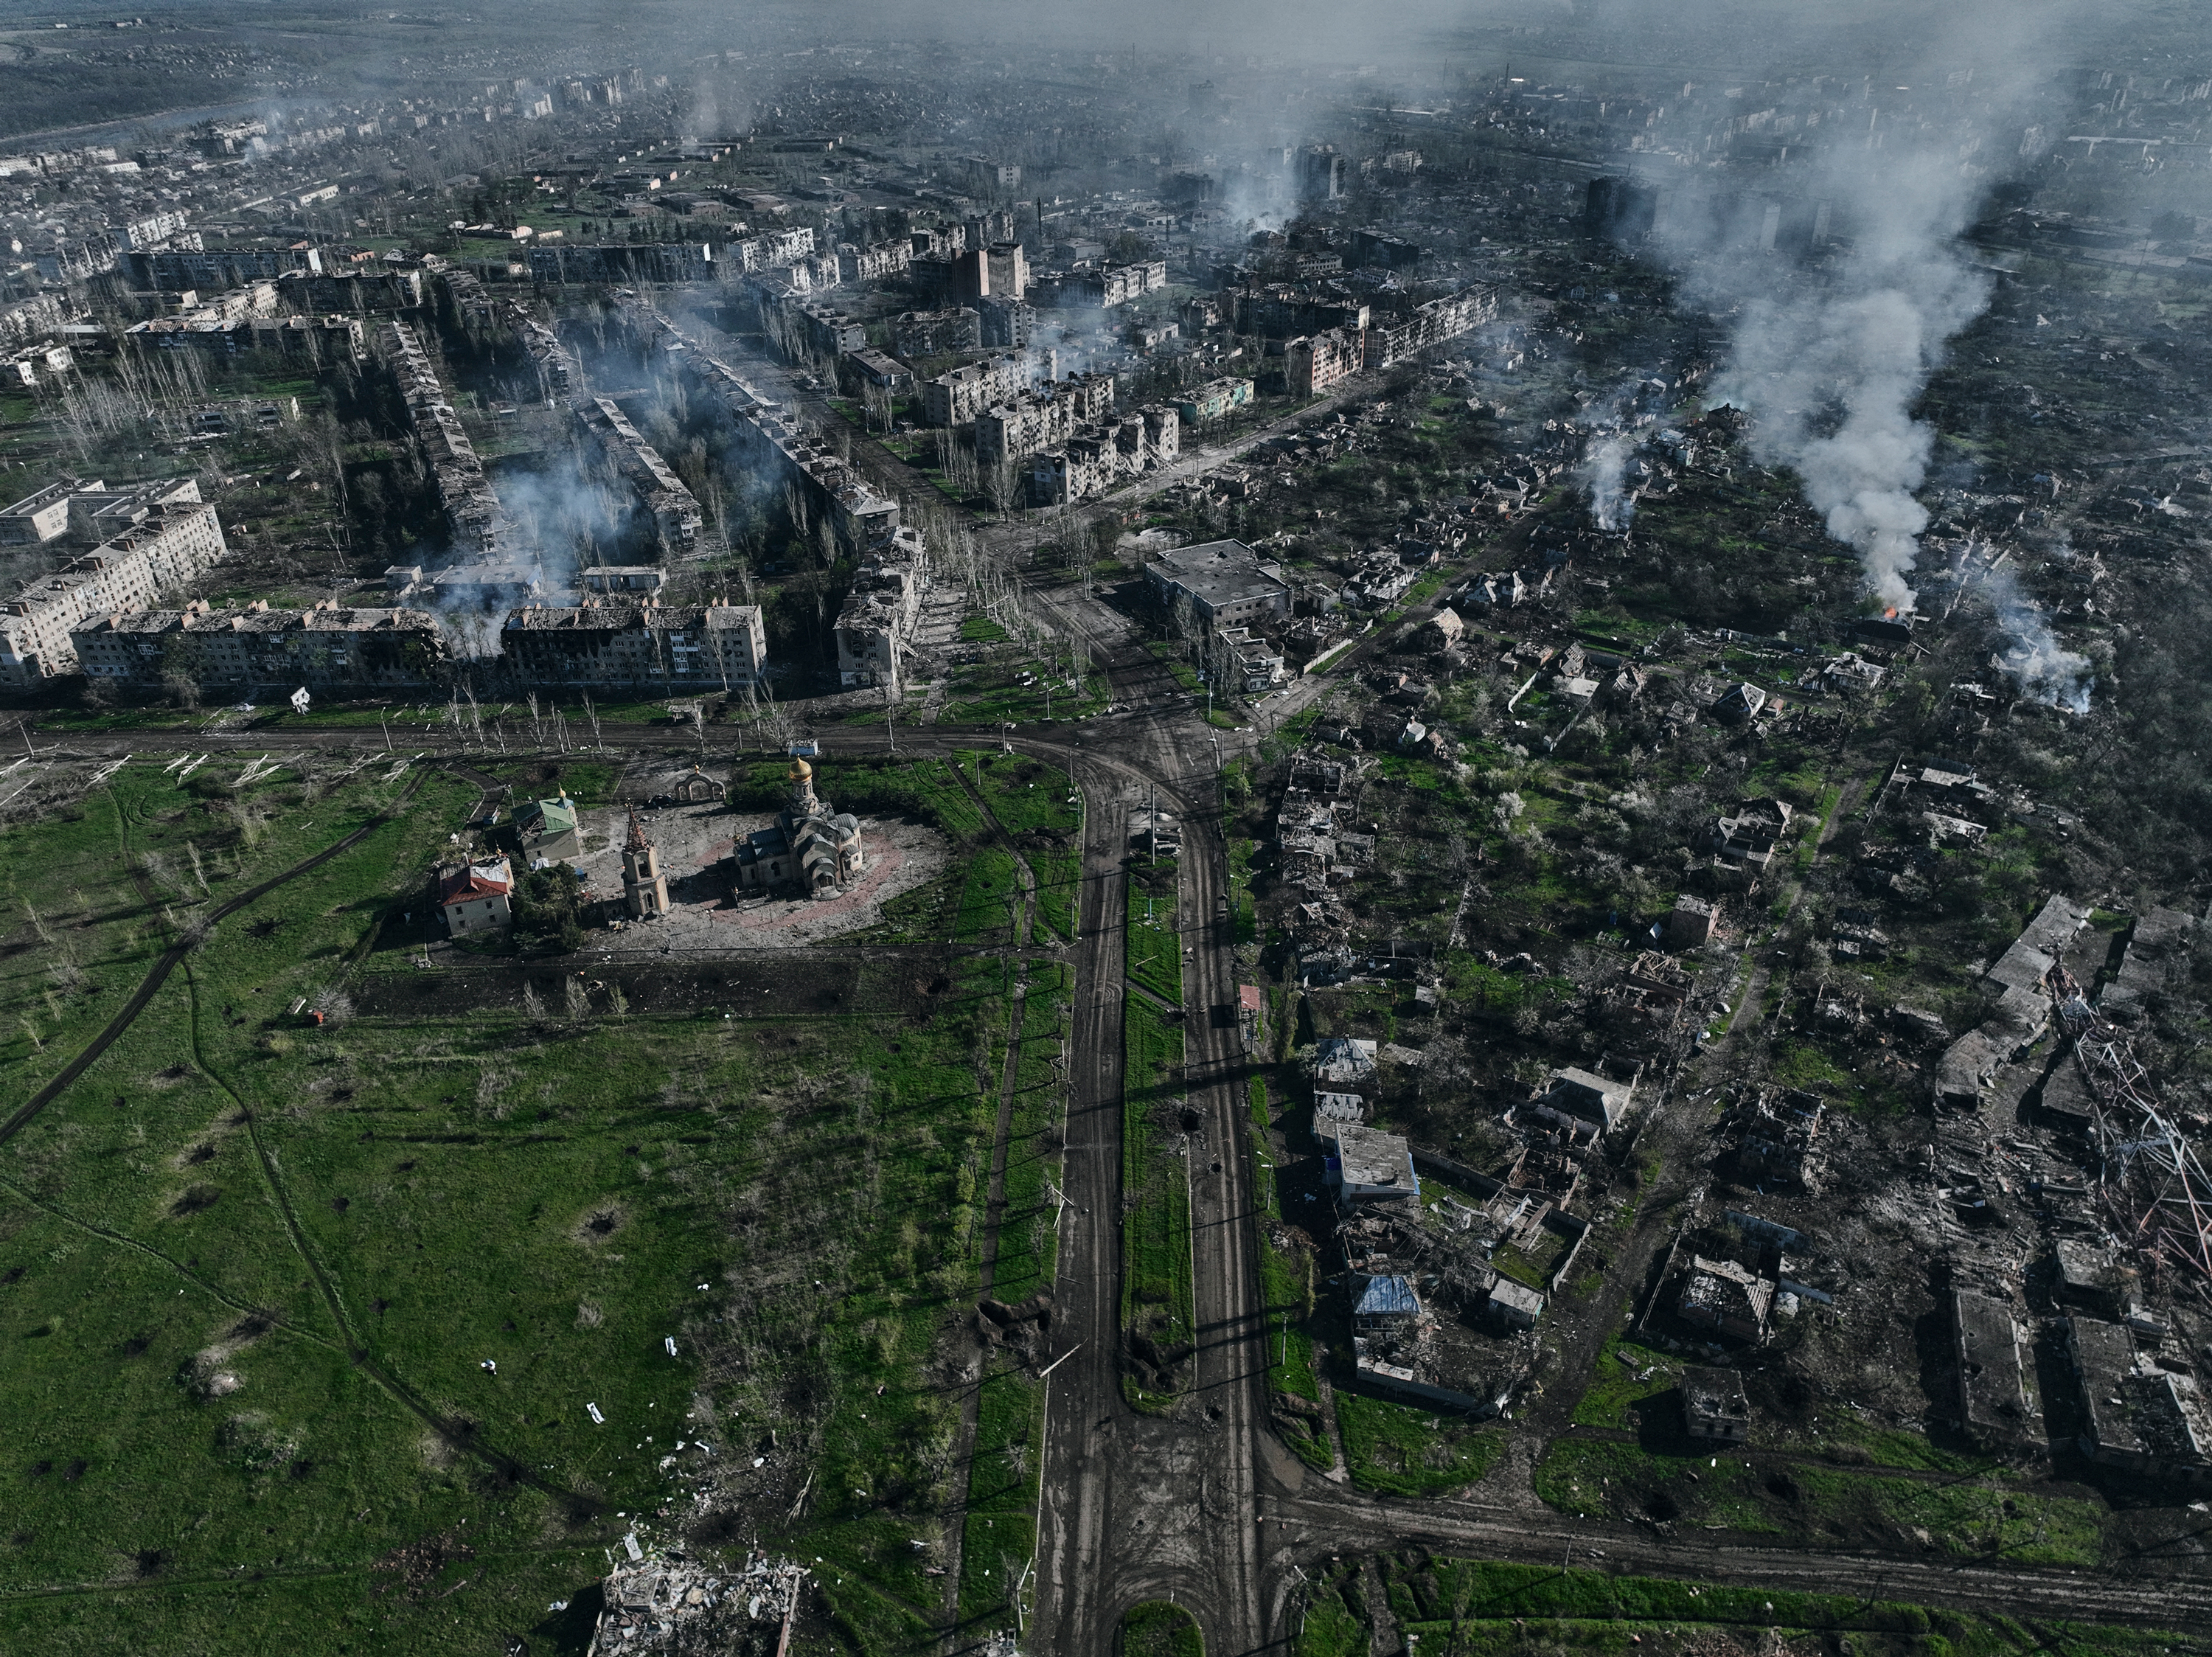 Smoke rises from buildings in an aerial view of Bakhmut, on April 26.